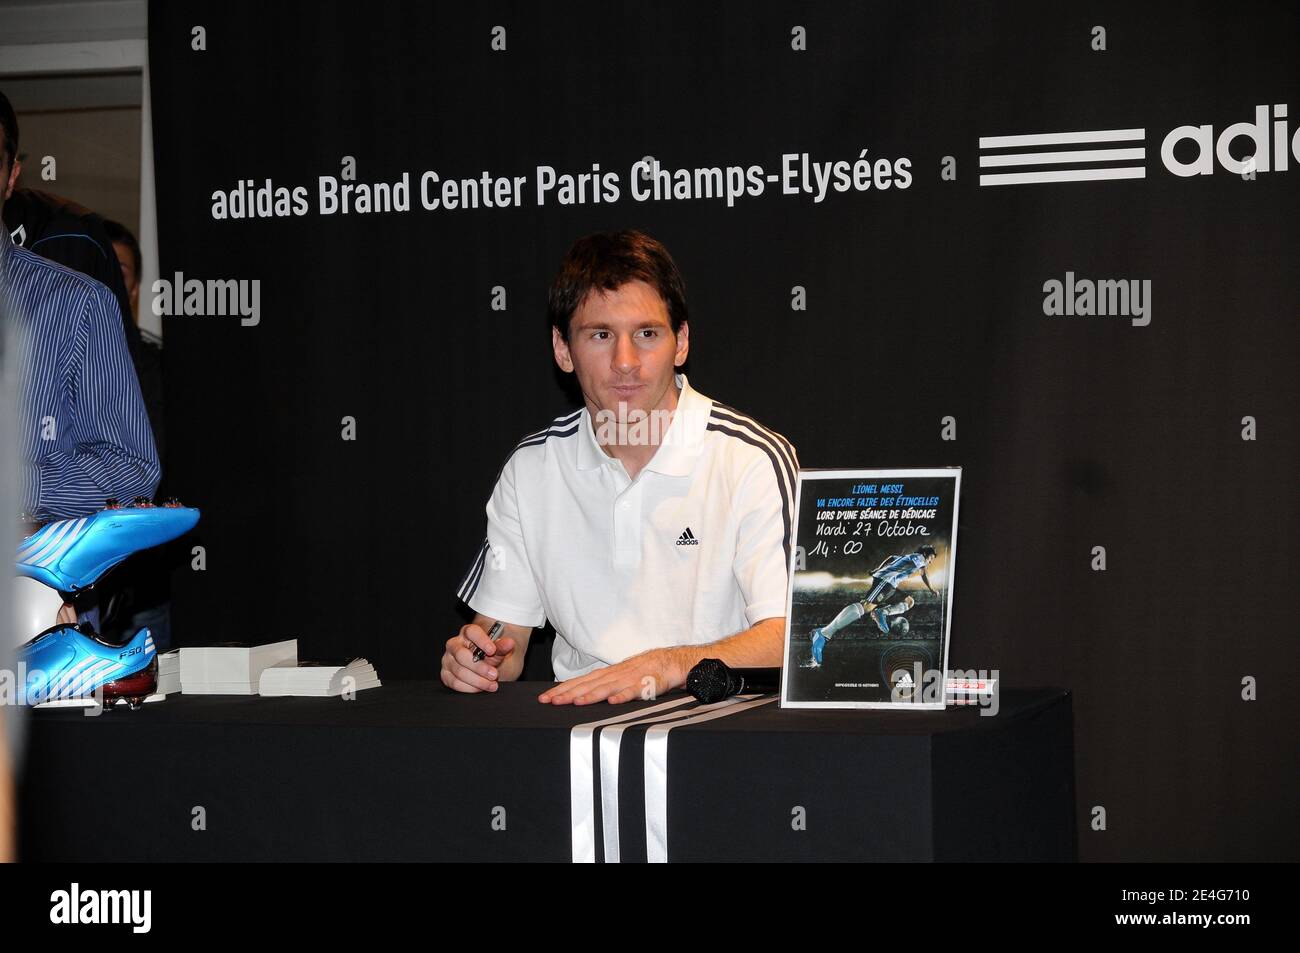 Lionel Messi, Argentinian football player of FC Barcelona during a  dedication session at a sponsor shop Adidas on the Champs Elysees in Paris,  France on October 27, 2009. Lionel Messi is one